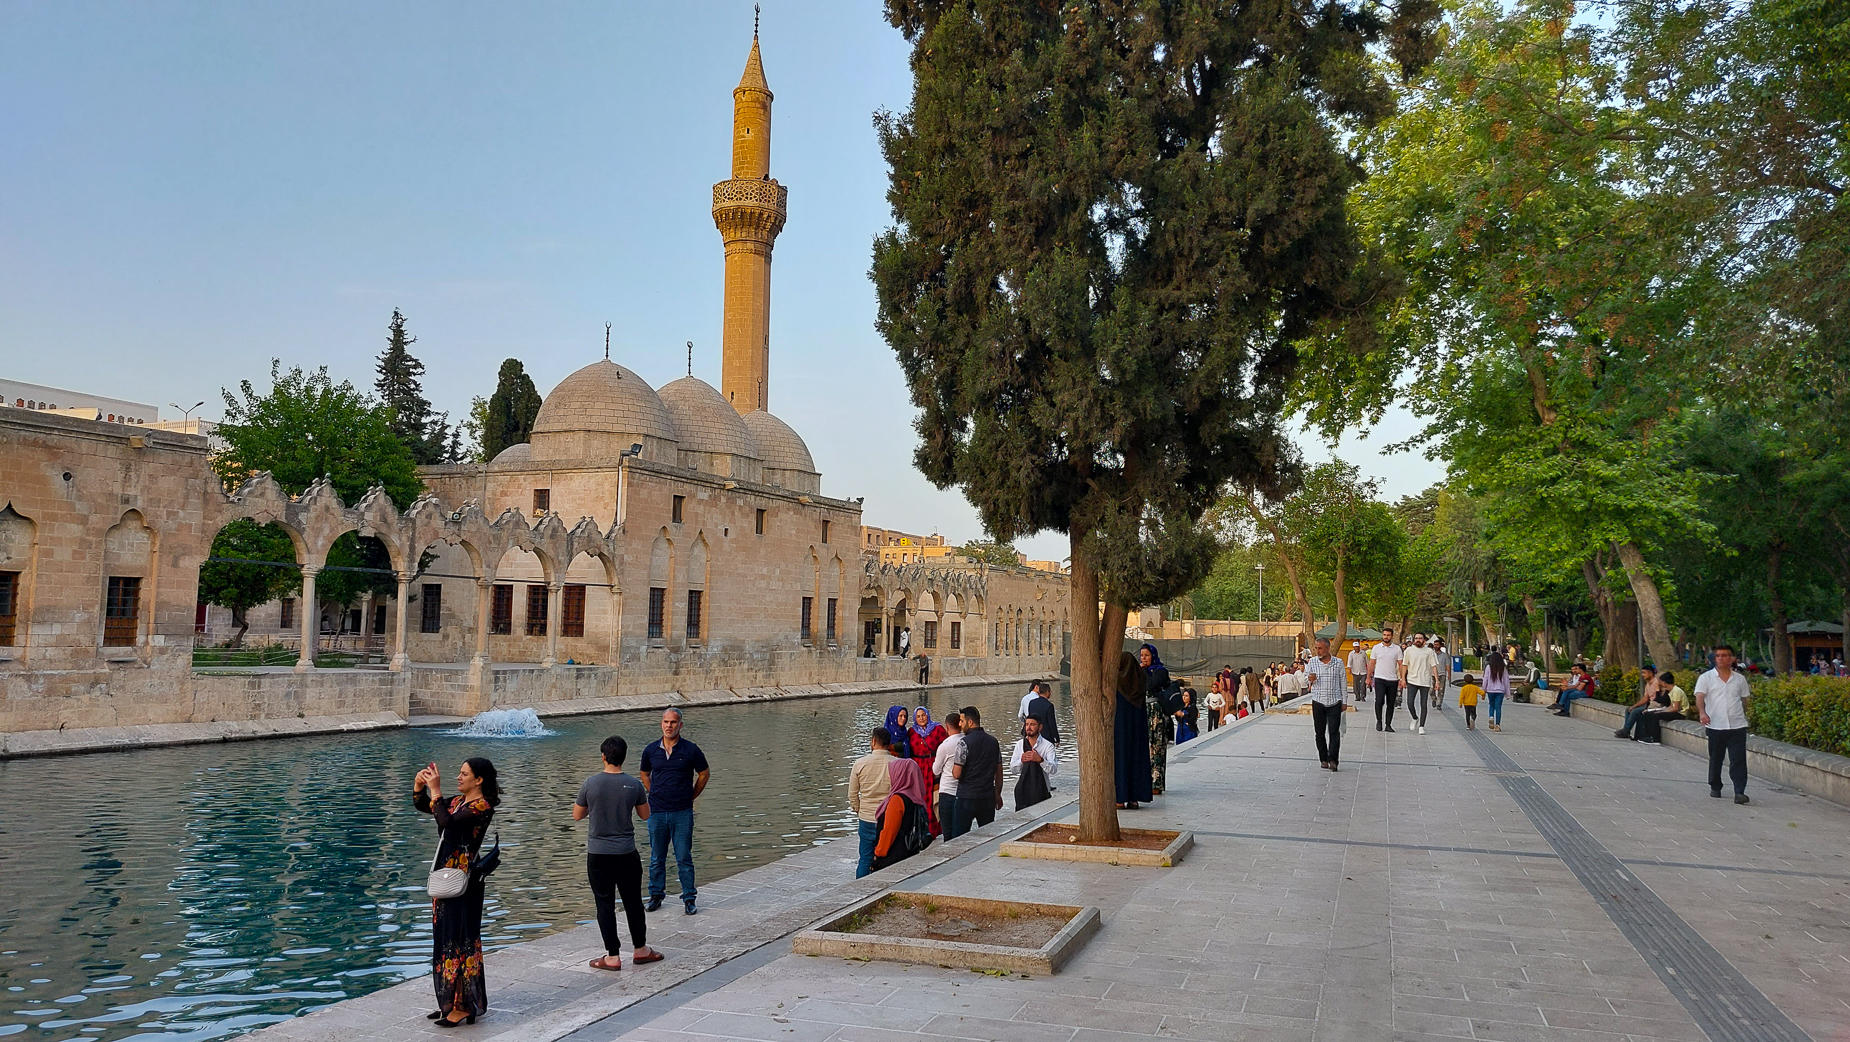 <span  class="uc_style_uc_tiles_grid_image_elementor_uc_items_attribute_title" style="color:#ffffff;">Rizvaniye Mosque, beautiful and relaxing gardens</span>